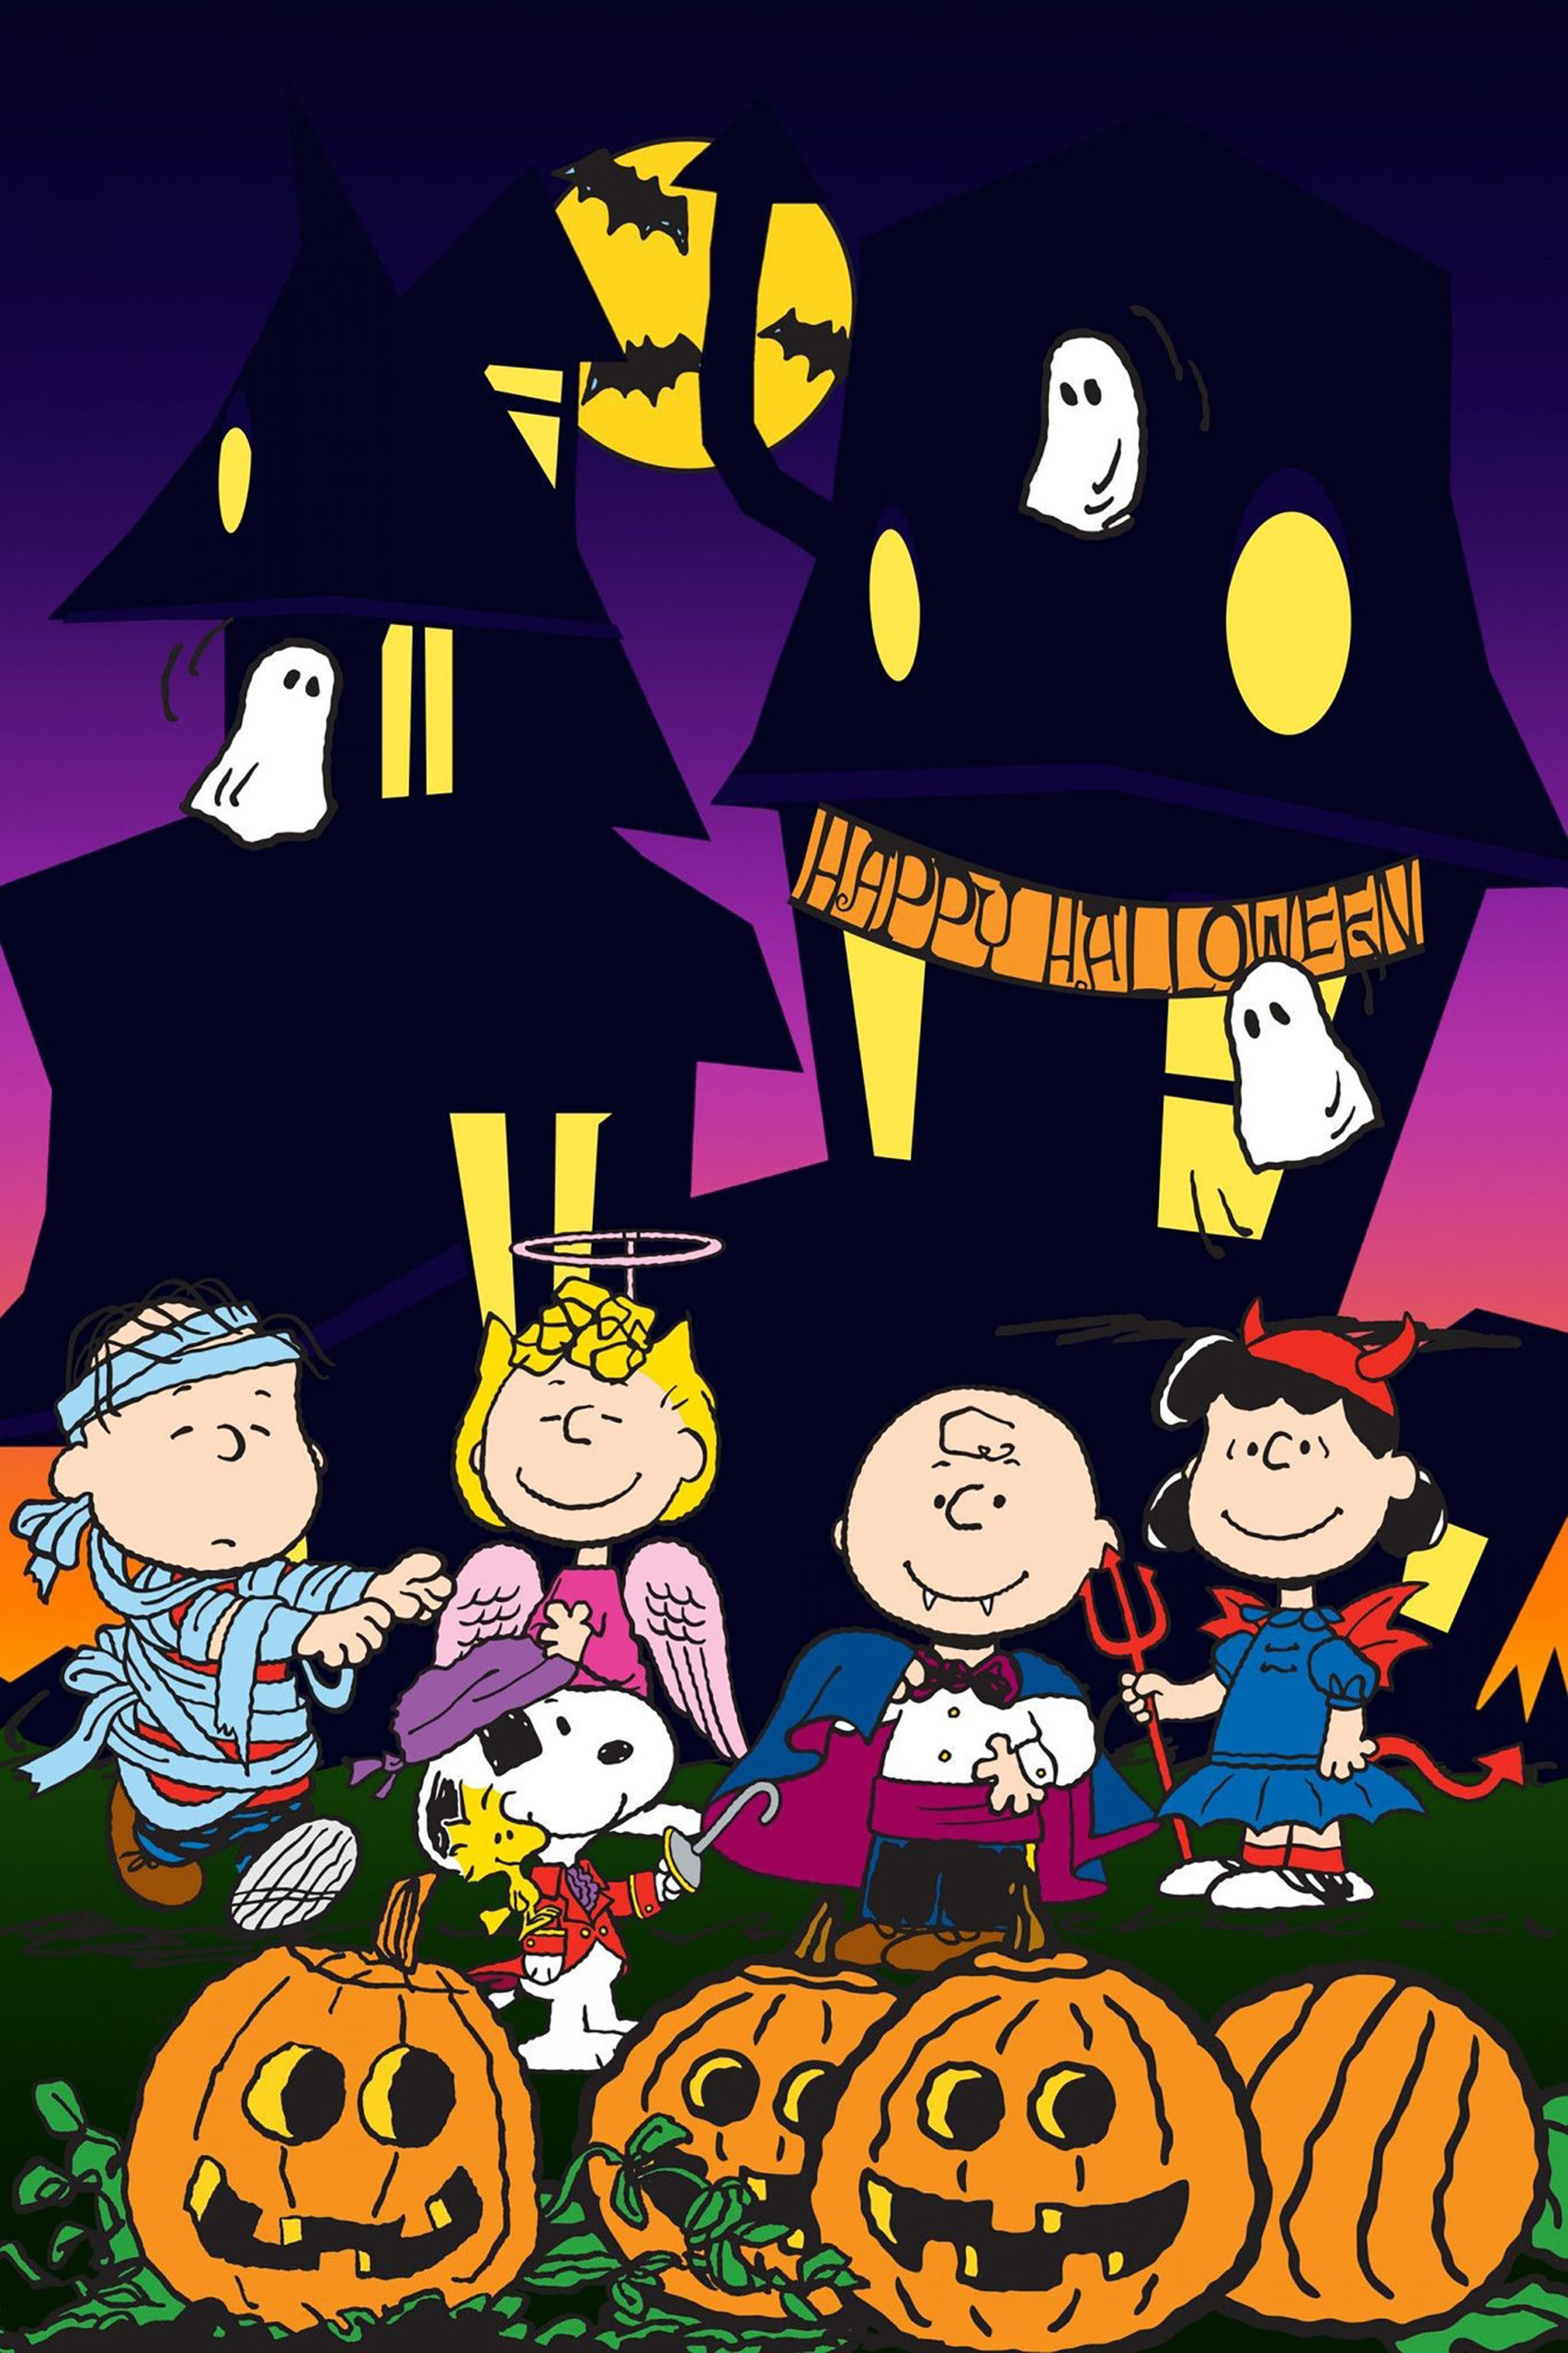 Charlie Brown Halloween iPhone Wallpaper with high-resolution 1080x1920 pixel. You can use this wallpaper for your iPhone 5, 6, 7, 8, X, XS, XR backgrounds, Mobile Screensaver, or iPad Lock Screen - Halloween, Charlie Brown